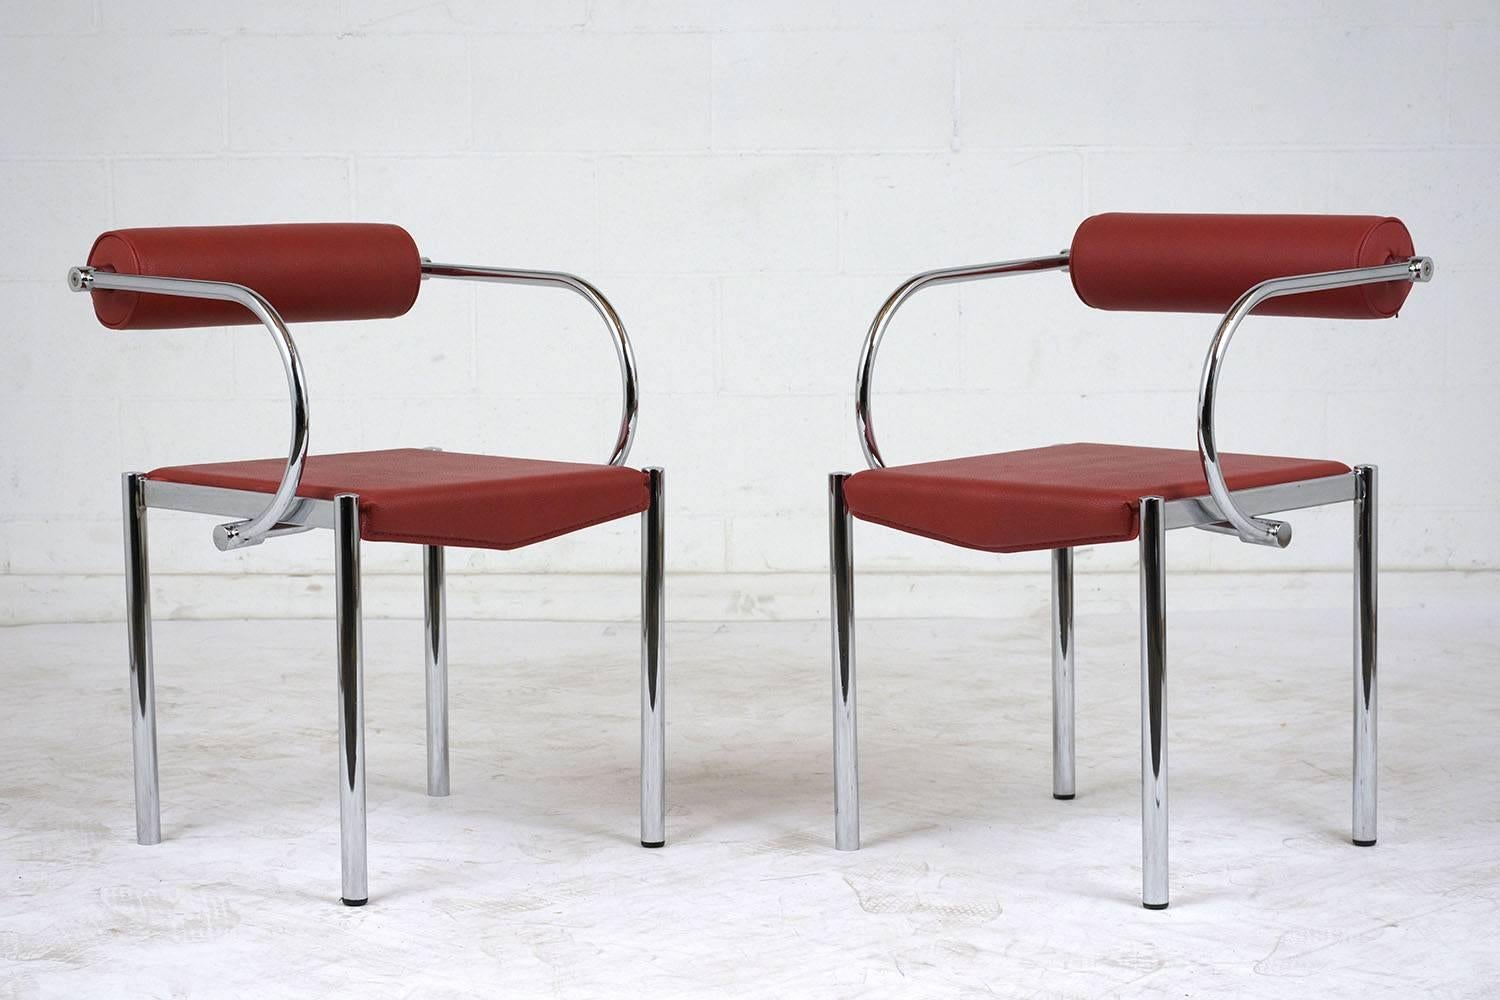 This pair of 1970s Mid-Century Modern Space Age style armchairs feature unique steel frames with a chrome finish. The curved arms attach to a floating backrest with a round cushion. The seat and backrest are upholstered in a striking red color